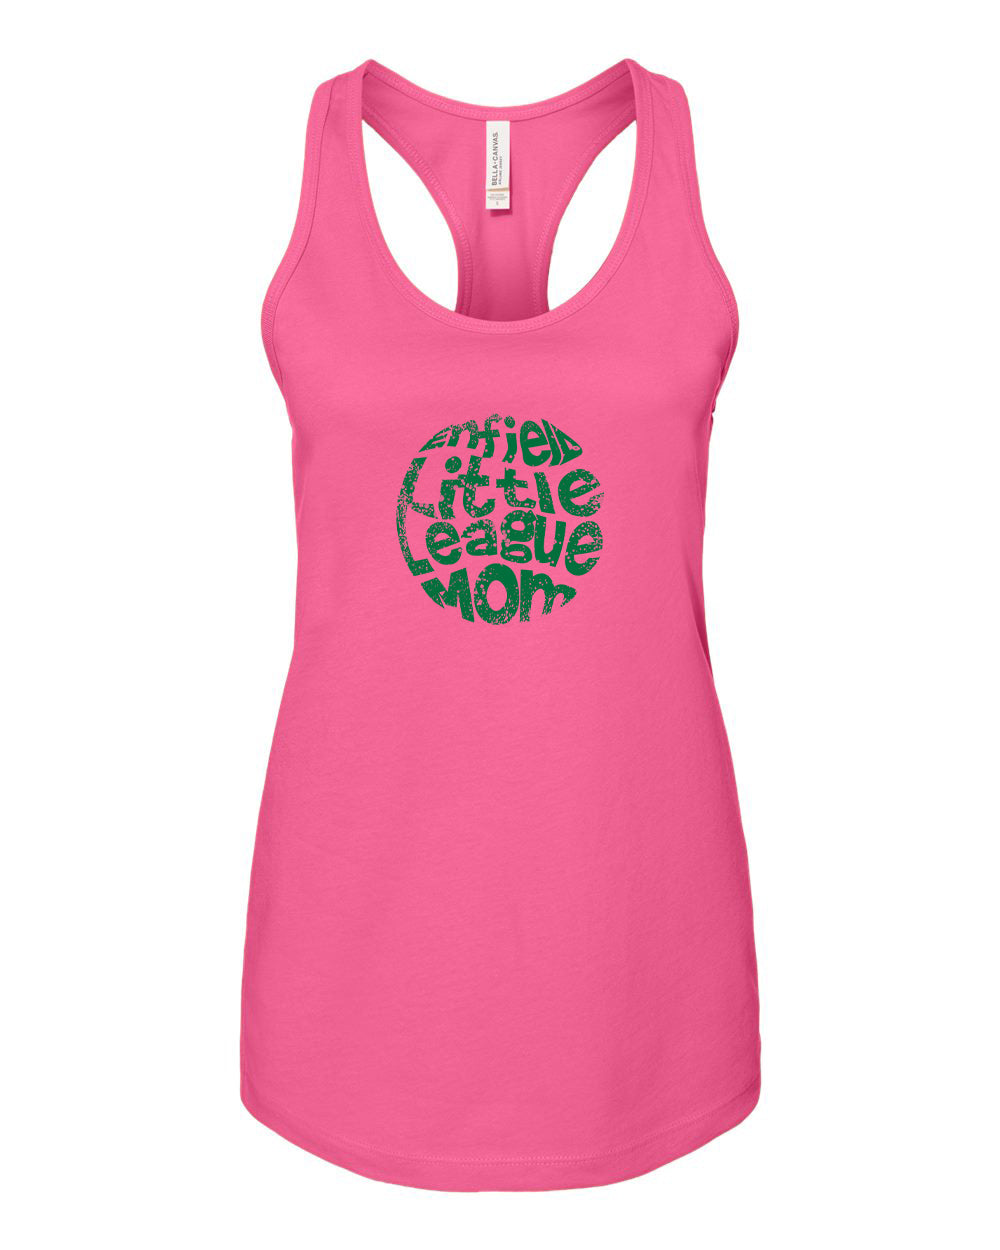 ELL Ladies Tank Top "MOM" - 6008 (color options available)